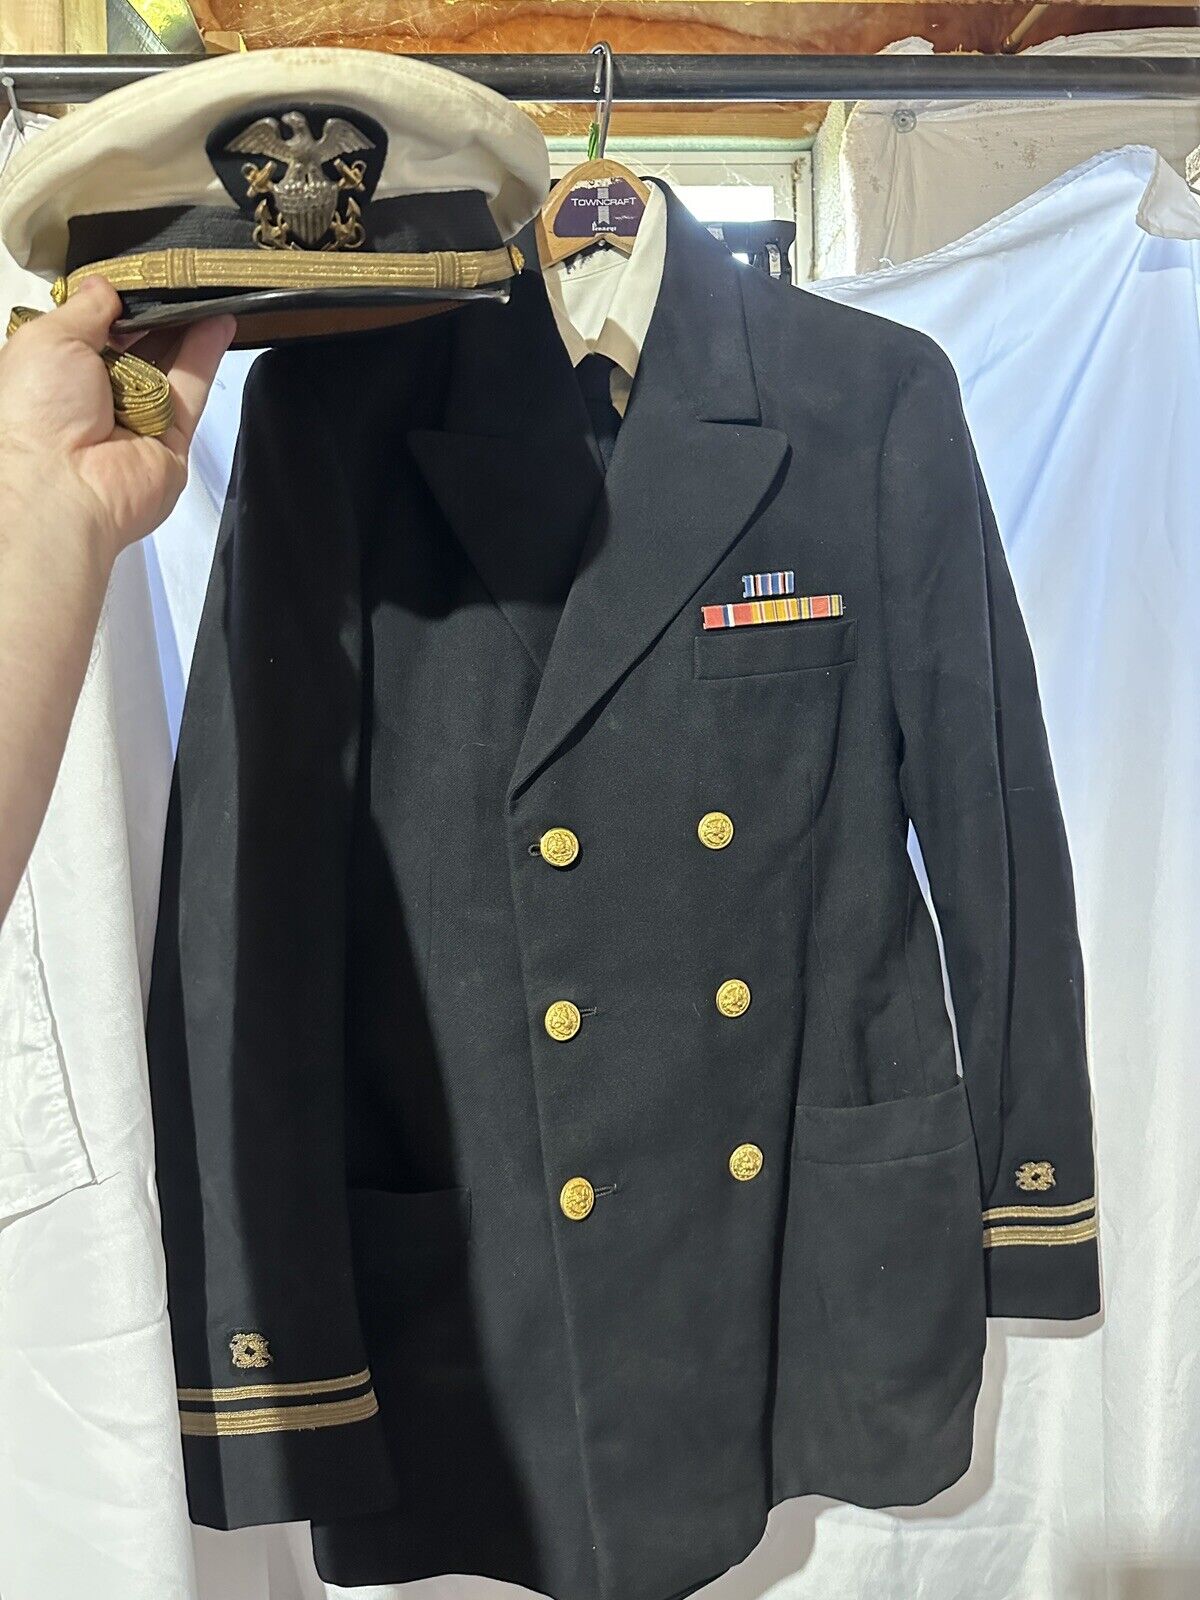 WW2 US Navy Engineer OFFICERS Uniform Jacket, Pants, Shirt, Hat and Tie